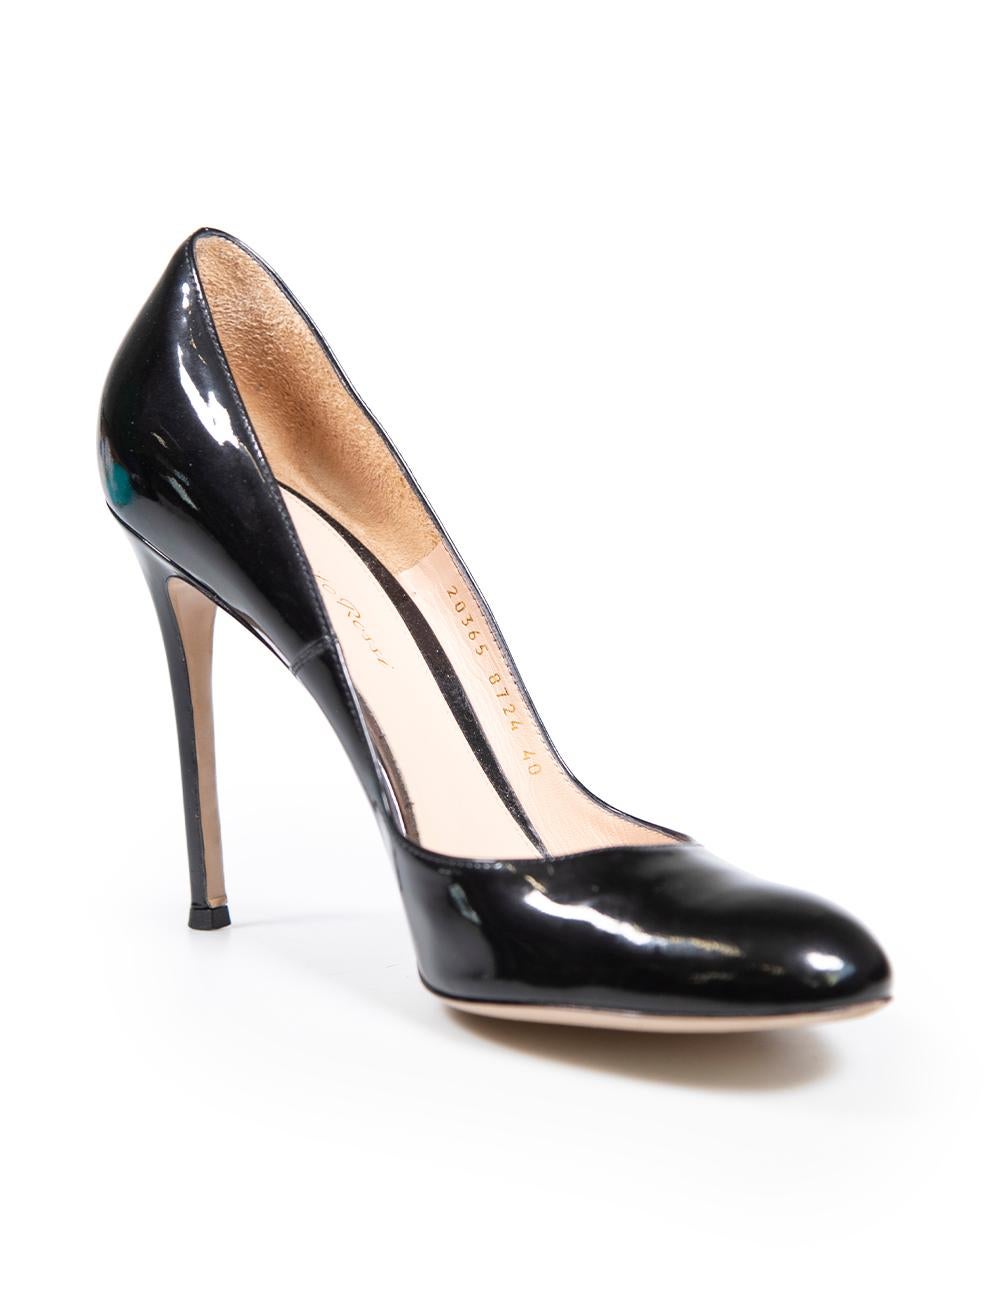 CONDITION is Very good. Minimal wear to pumps is evident. Minimal creasing to patent leather of top line on this used Gianvito Rossi designer resale item. This item comes with original dust bags.
 
 Details
 Black
 Patent leather
 Pumps
 Almond toe
